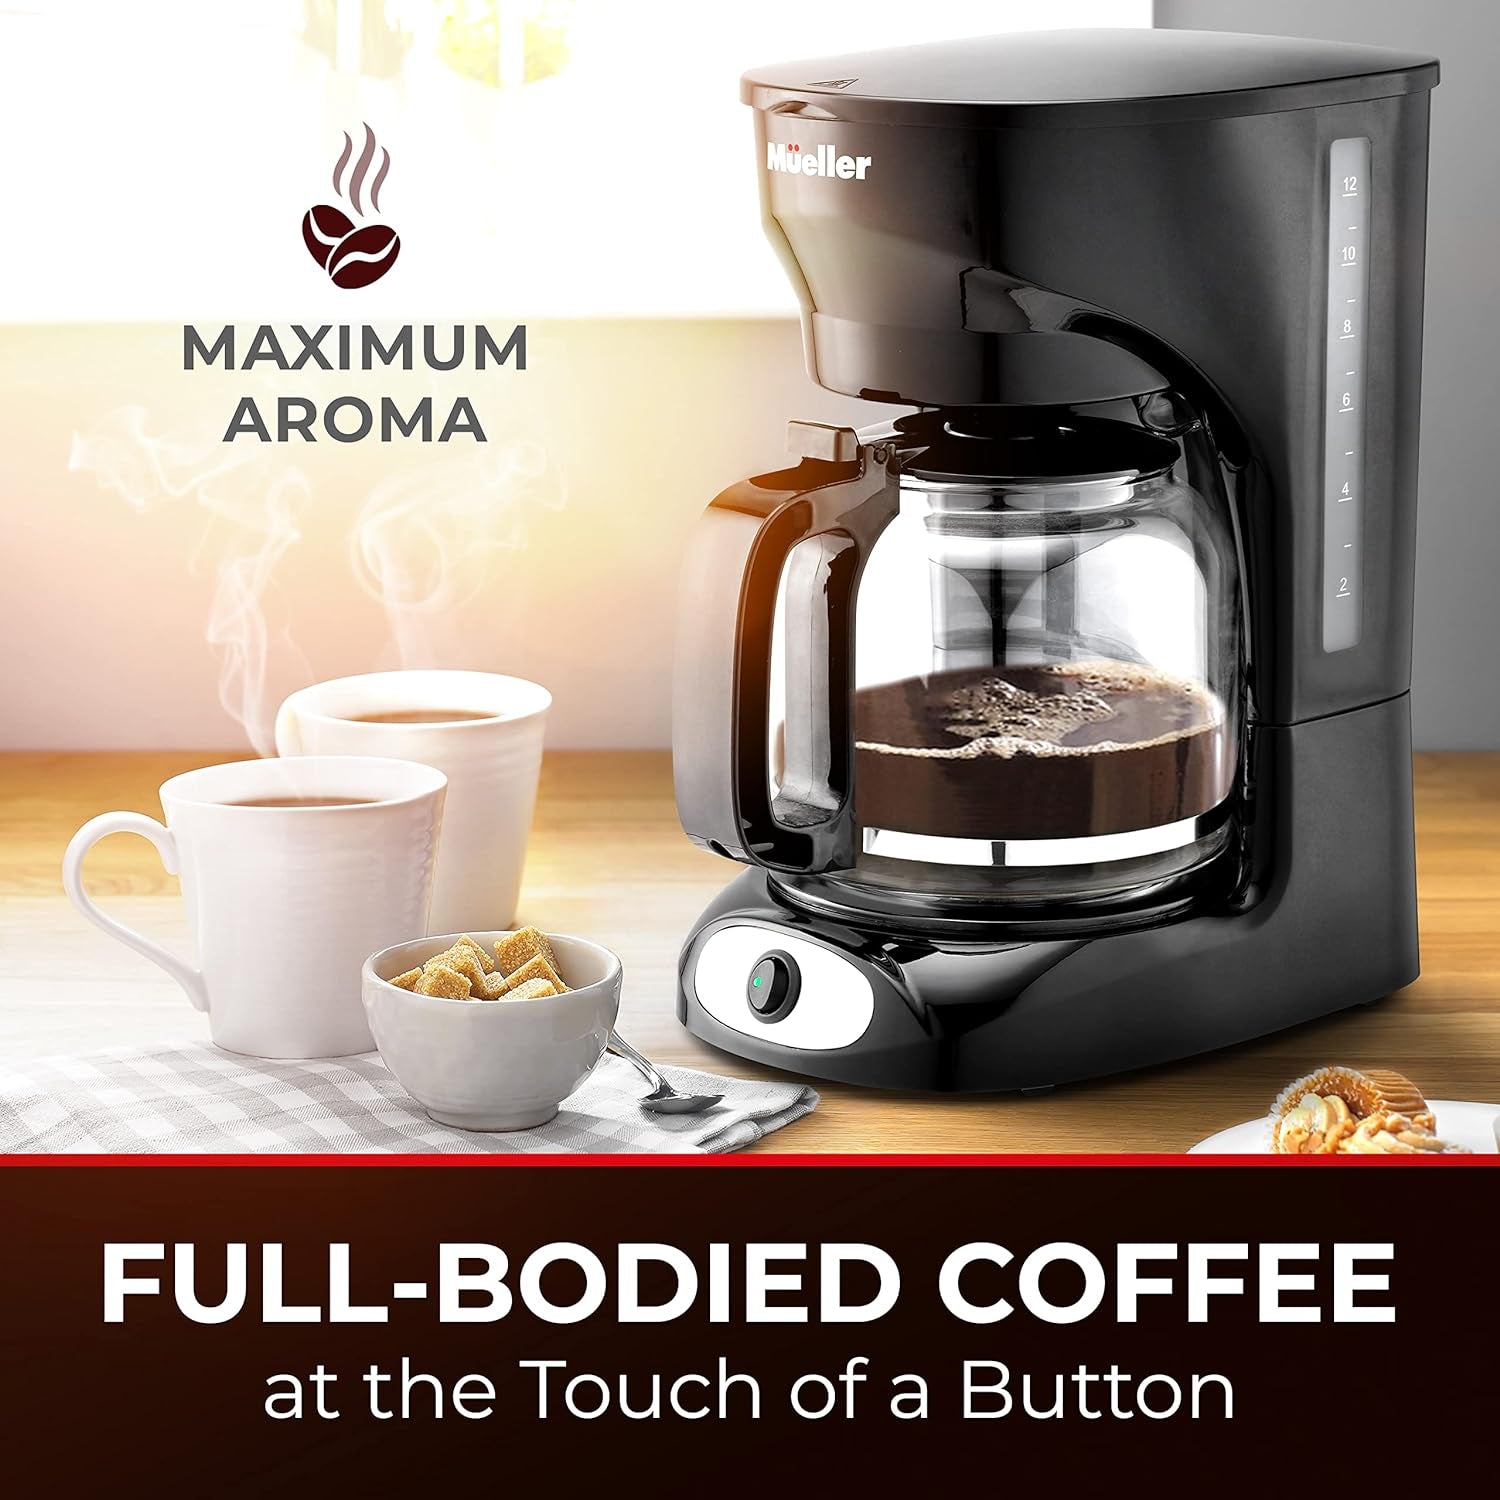 12-Cup Drip Coffee Maker Machine with Anti-Drip System, Permanent Filter, Glass Carafe, and Auto Keep Warm Function